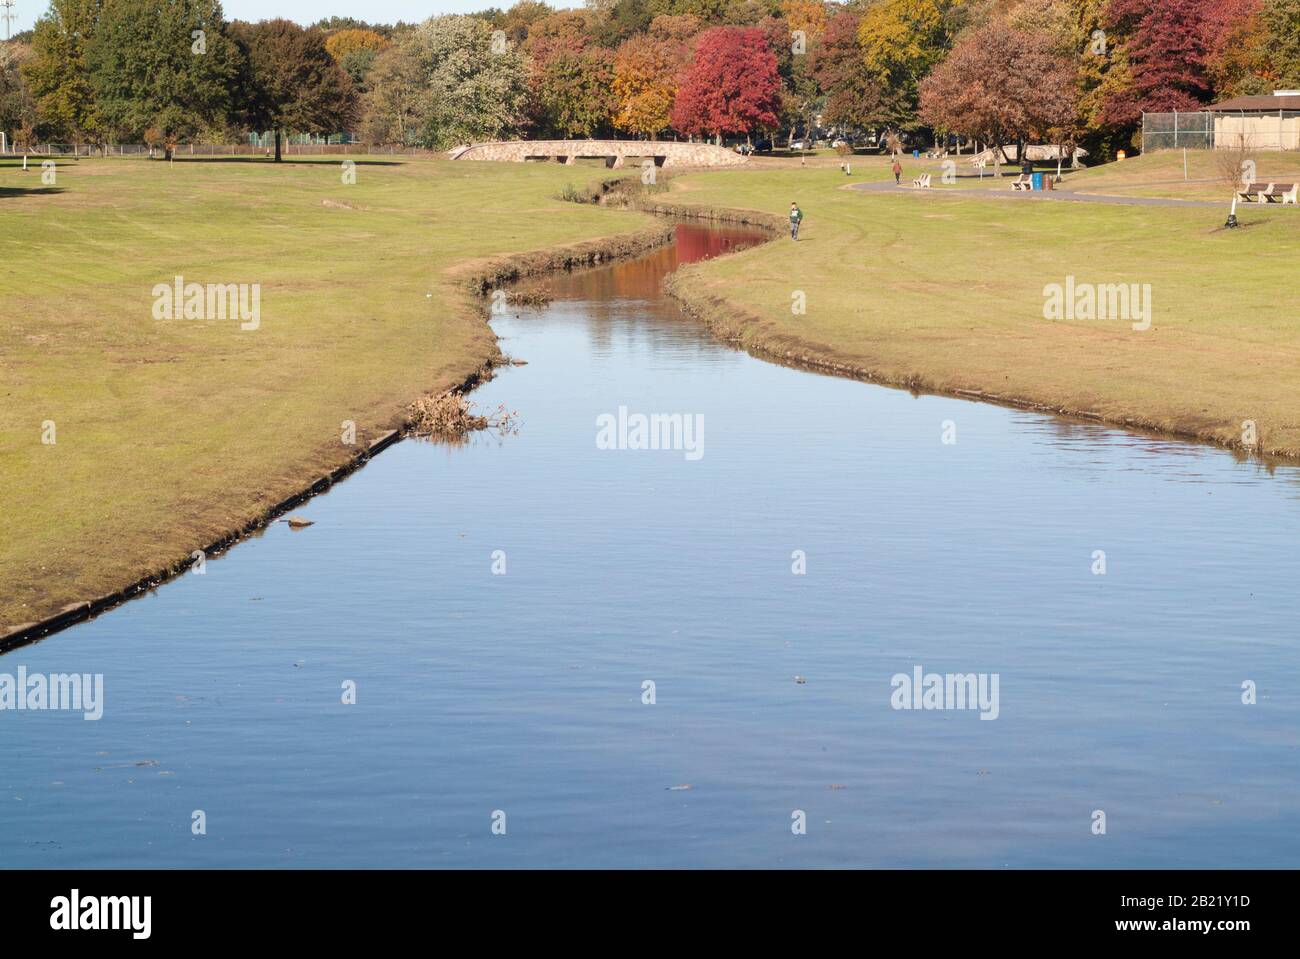 PARKS AND RECREATION VOLUME 2: Spring lake park of South Plainfield, New Jersey. Stock Photo